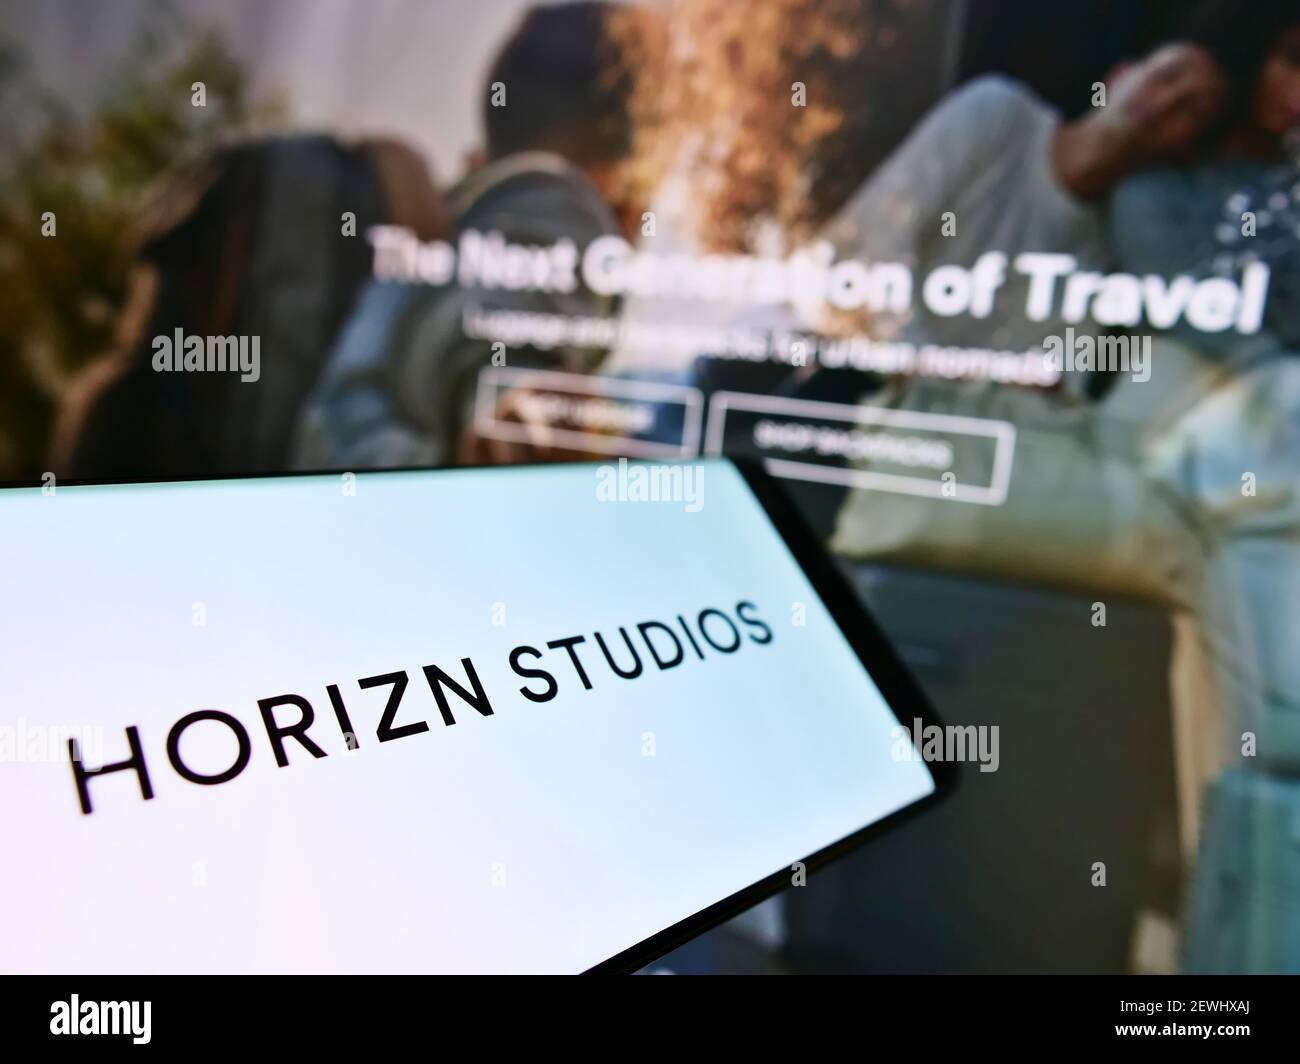 Cellphone with logo of German luggage business Horizn Studios (HS New Travel GmbH) on screen in front of web page. Focus on center of phone display. Stock Photo